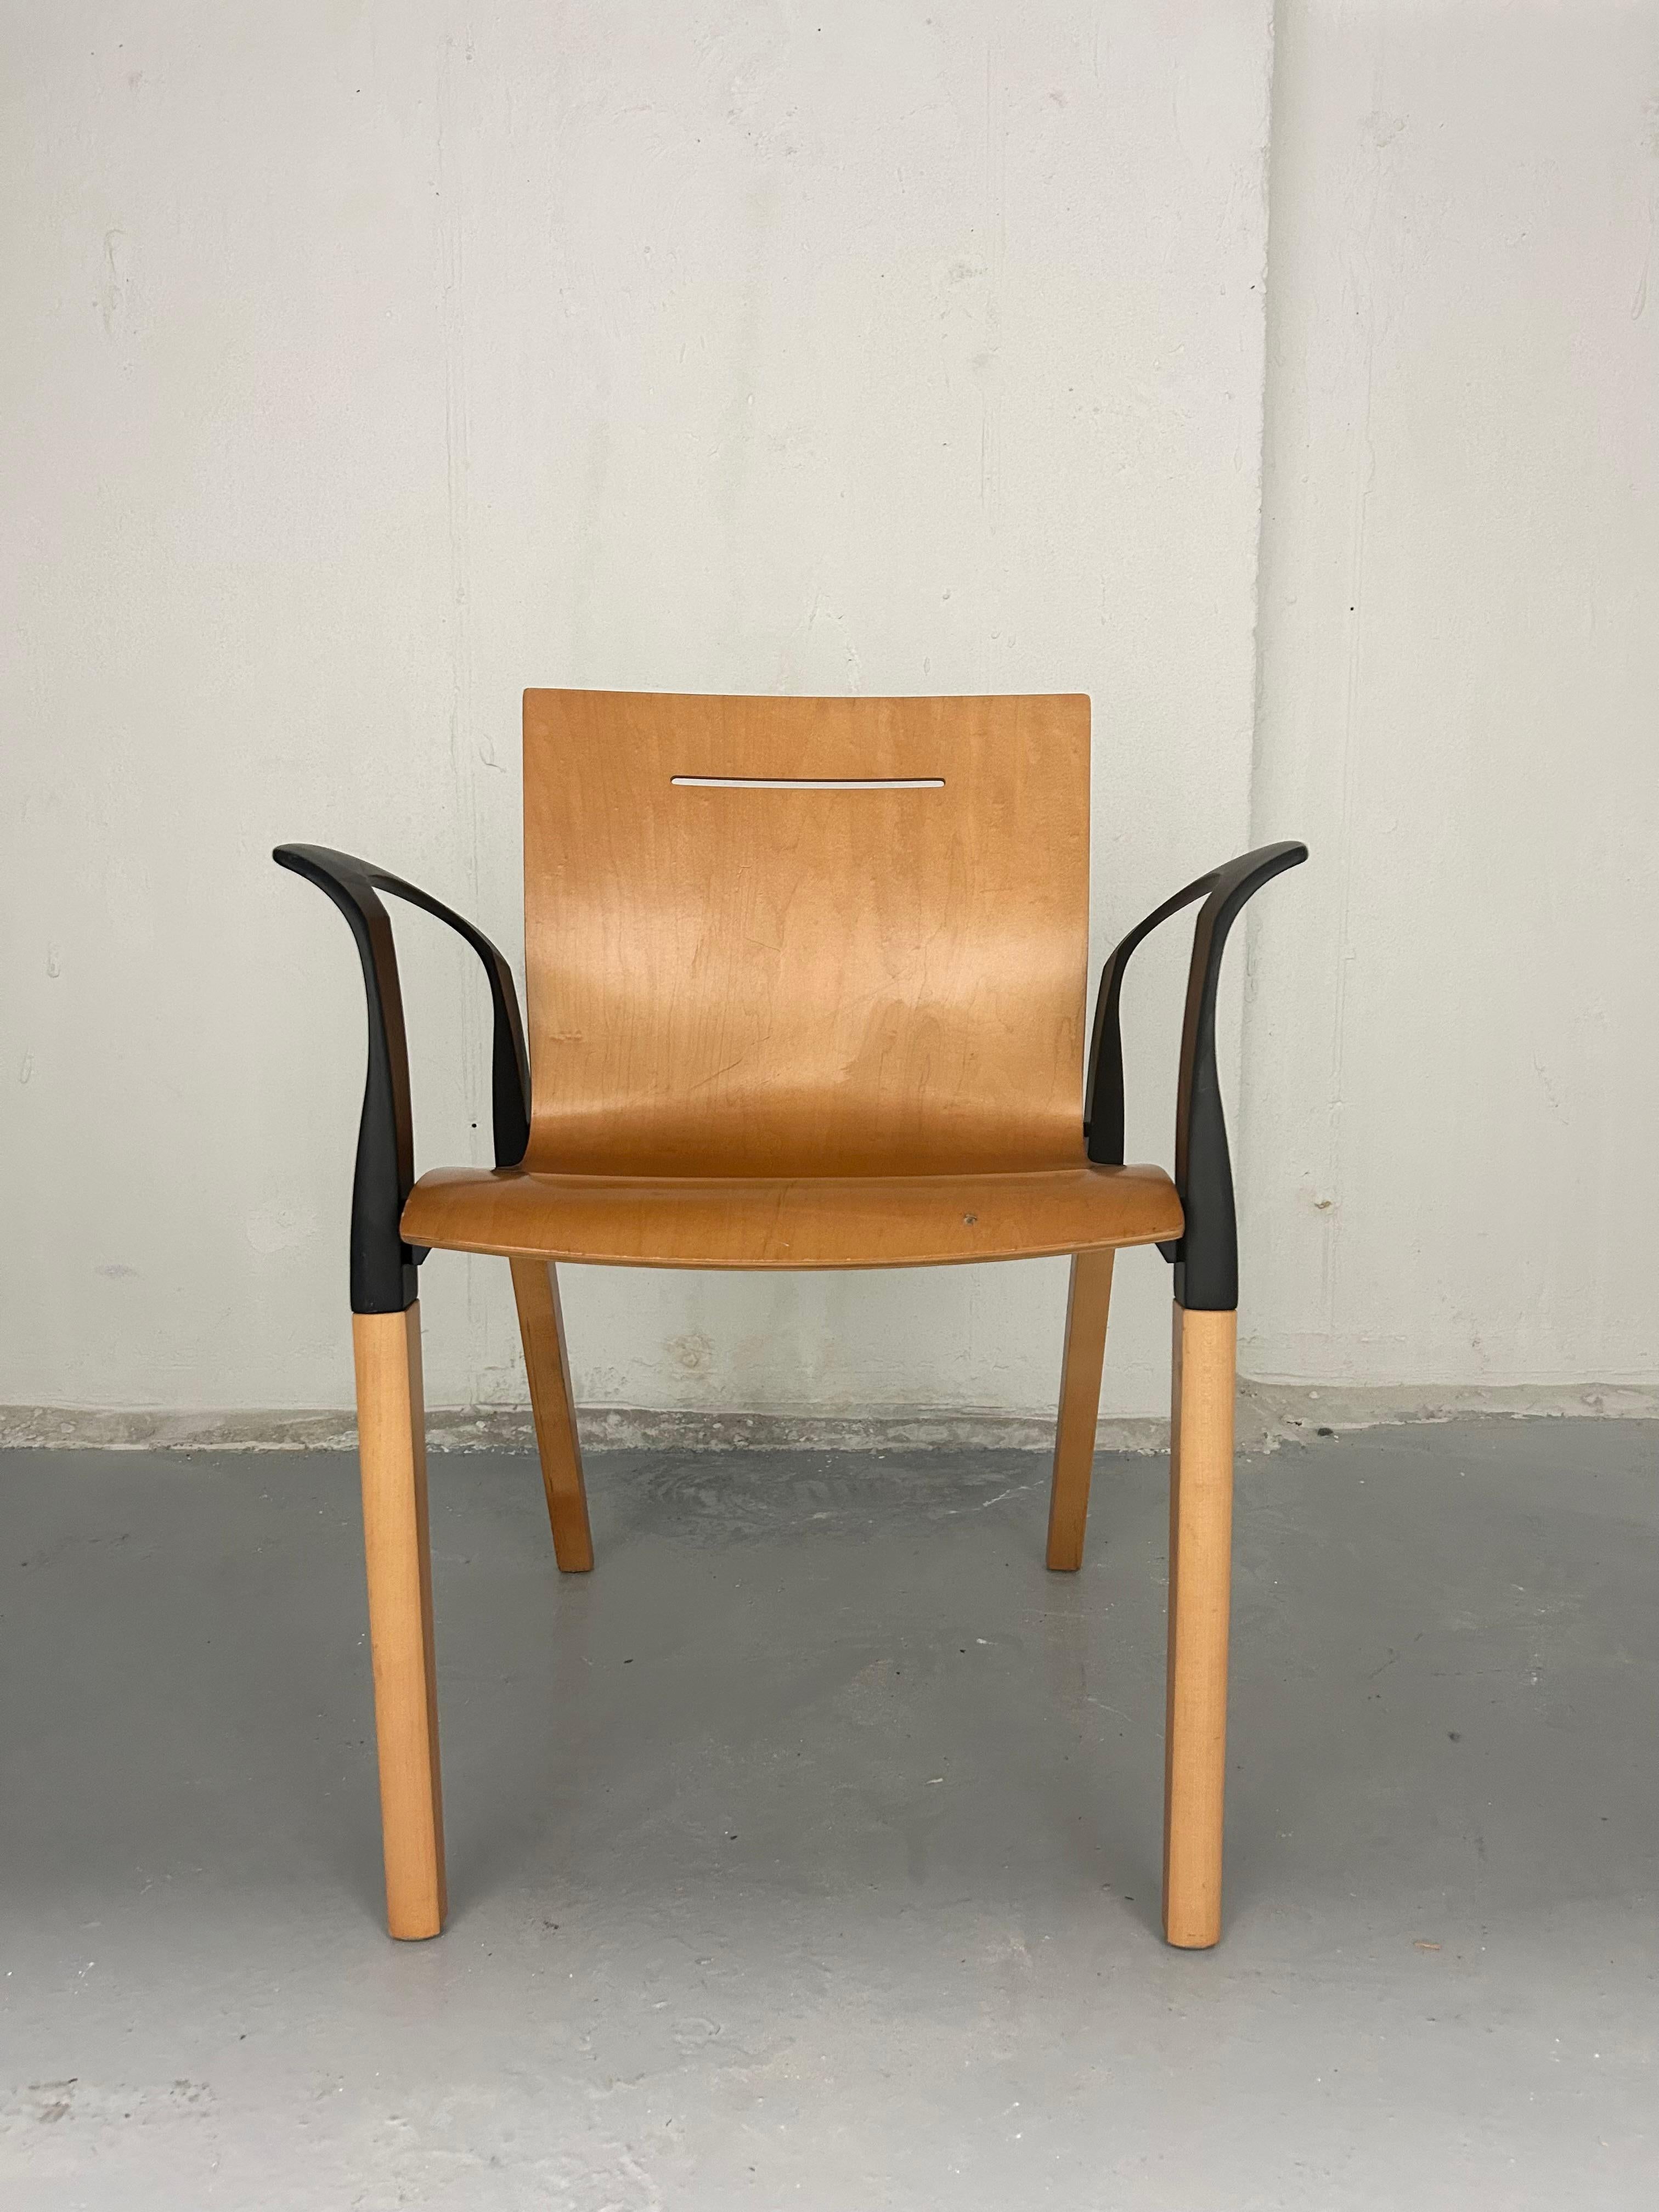 Bentwood and steel chair by Steelcase from 2001. Minimal wear. 

32” height
18” seat height
26.5” arm height
24.5” width
26” depth